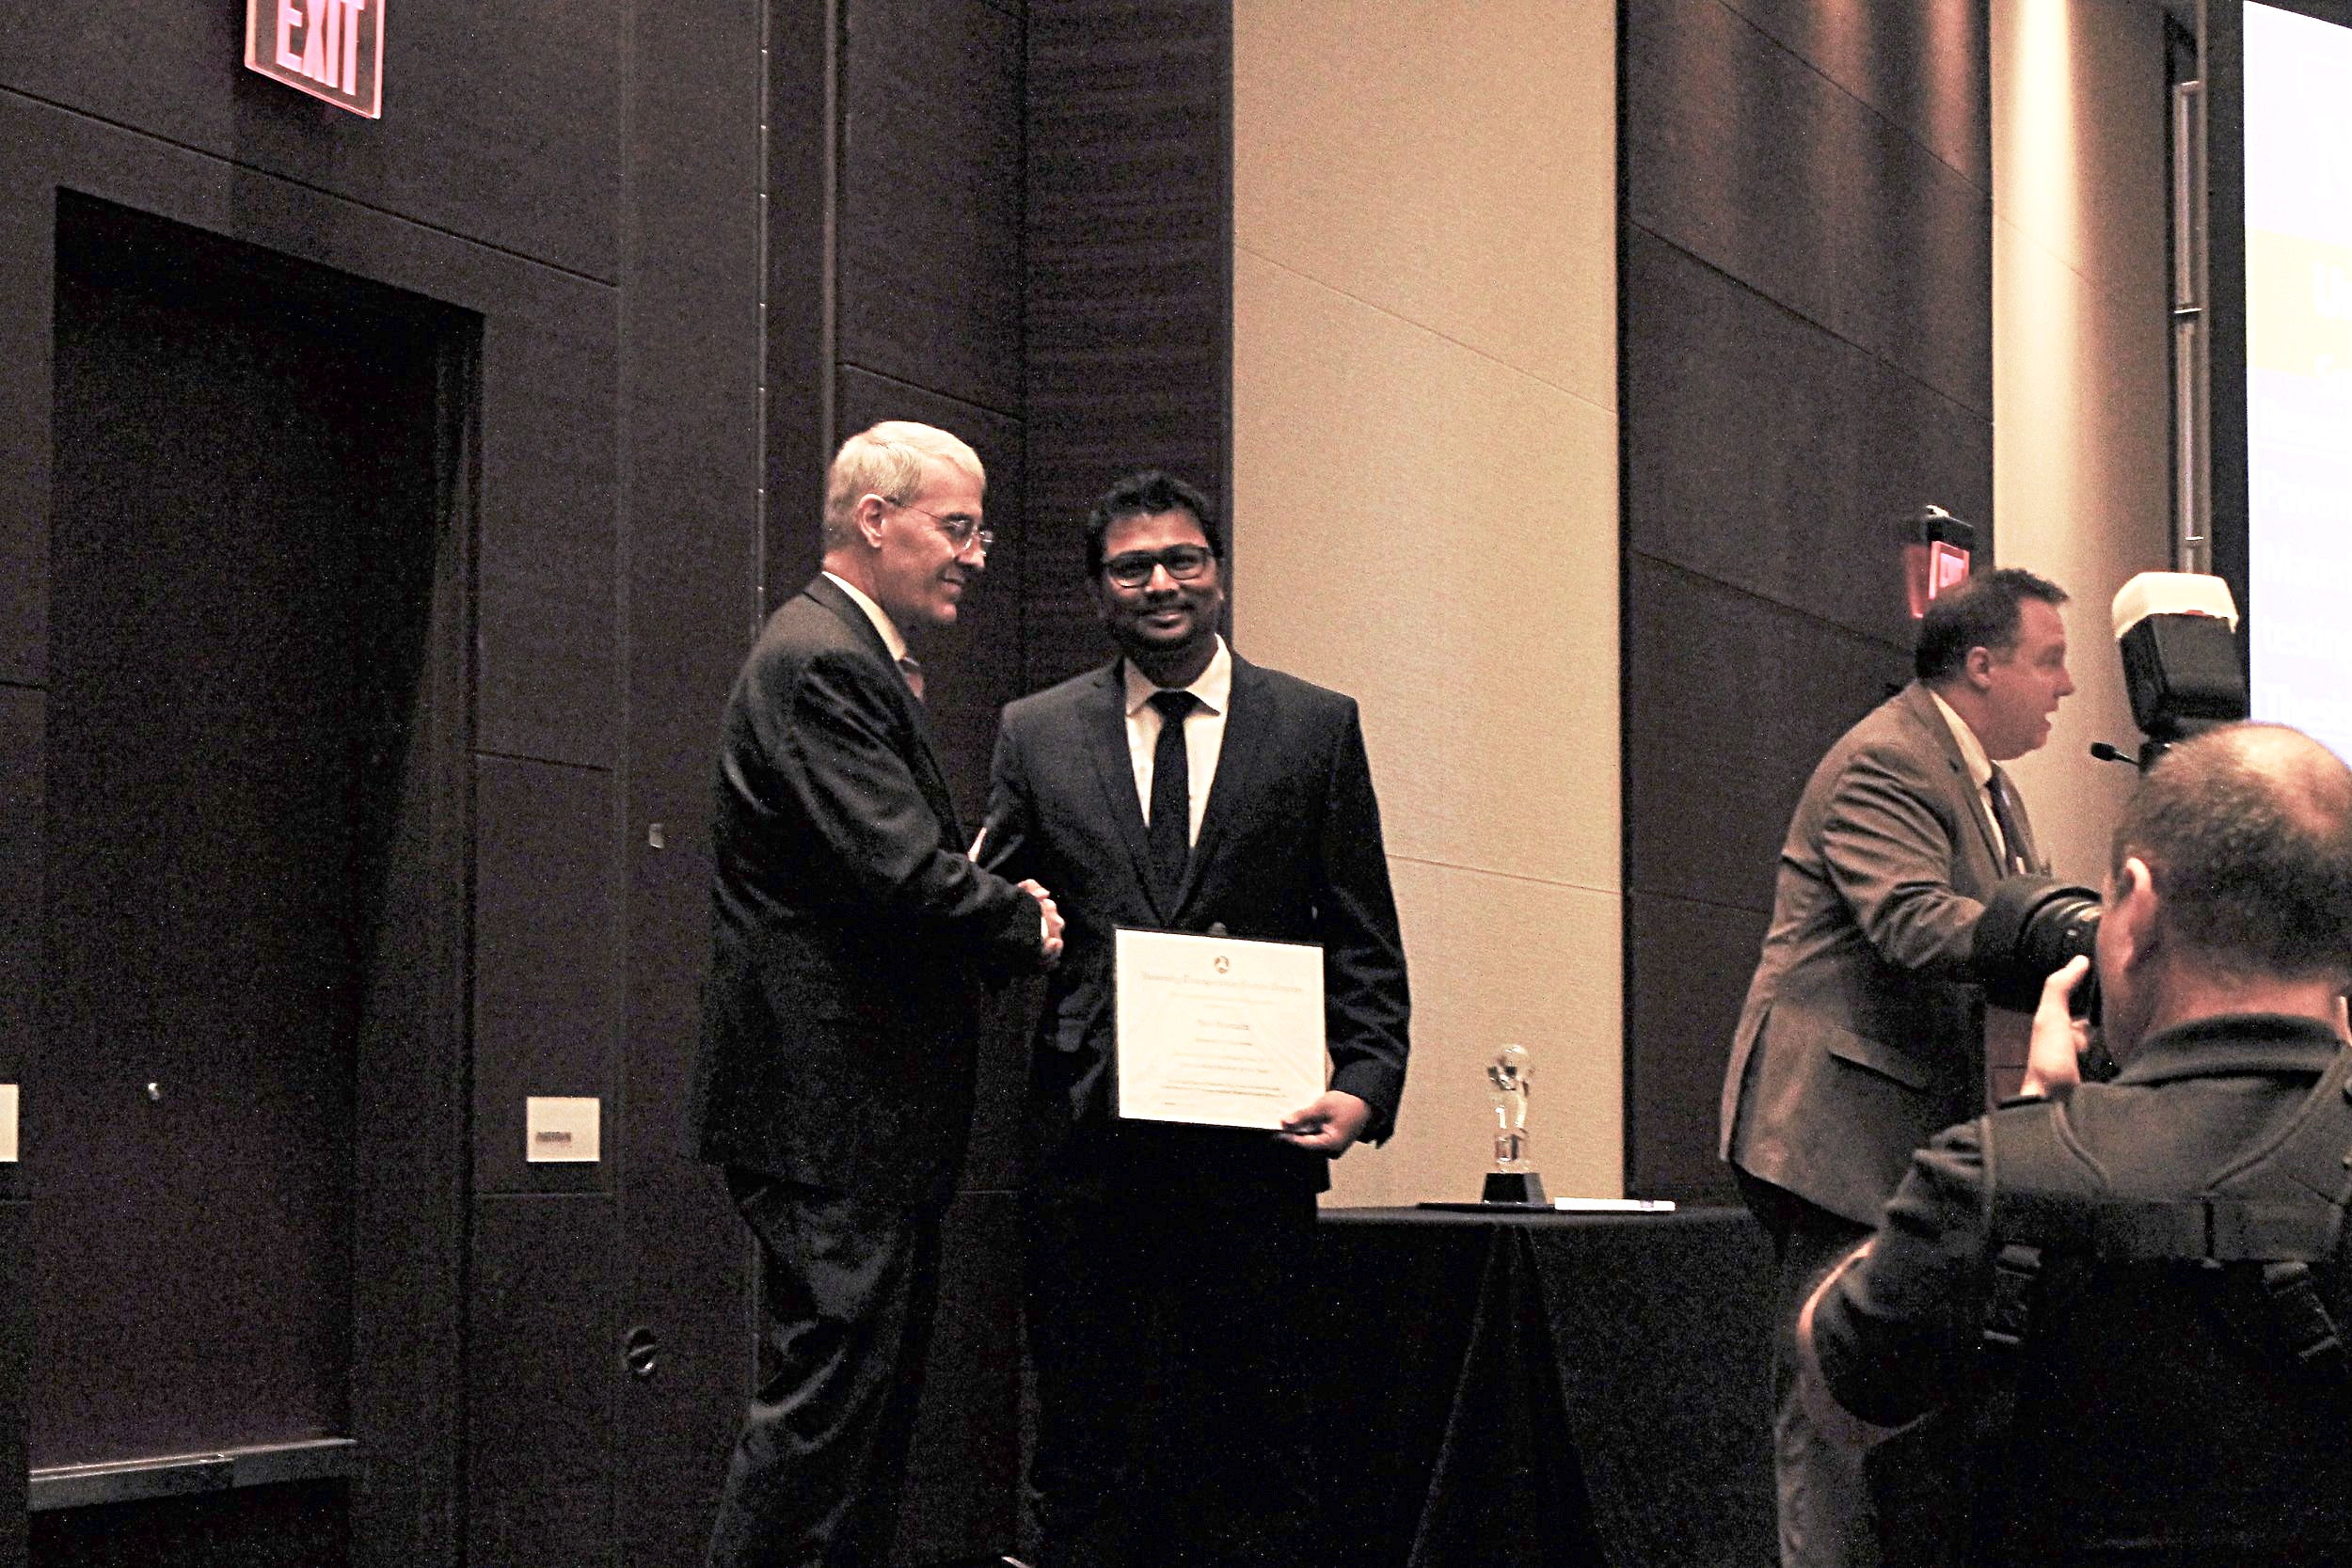   Nur Hossain (OU), SPTC’s 2018 Student of the Year, receives his award at the Council for University Transportation Center’s Annual Banquet in Washington DC, January 6, 2018.&nbsp;  